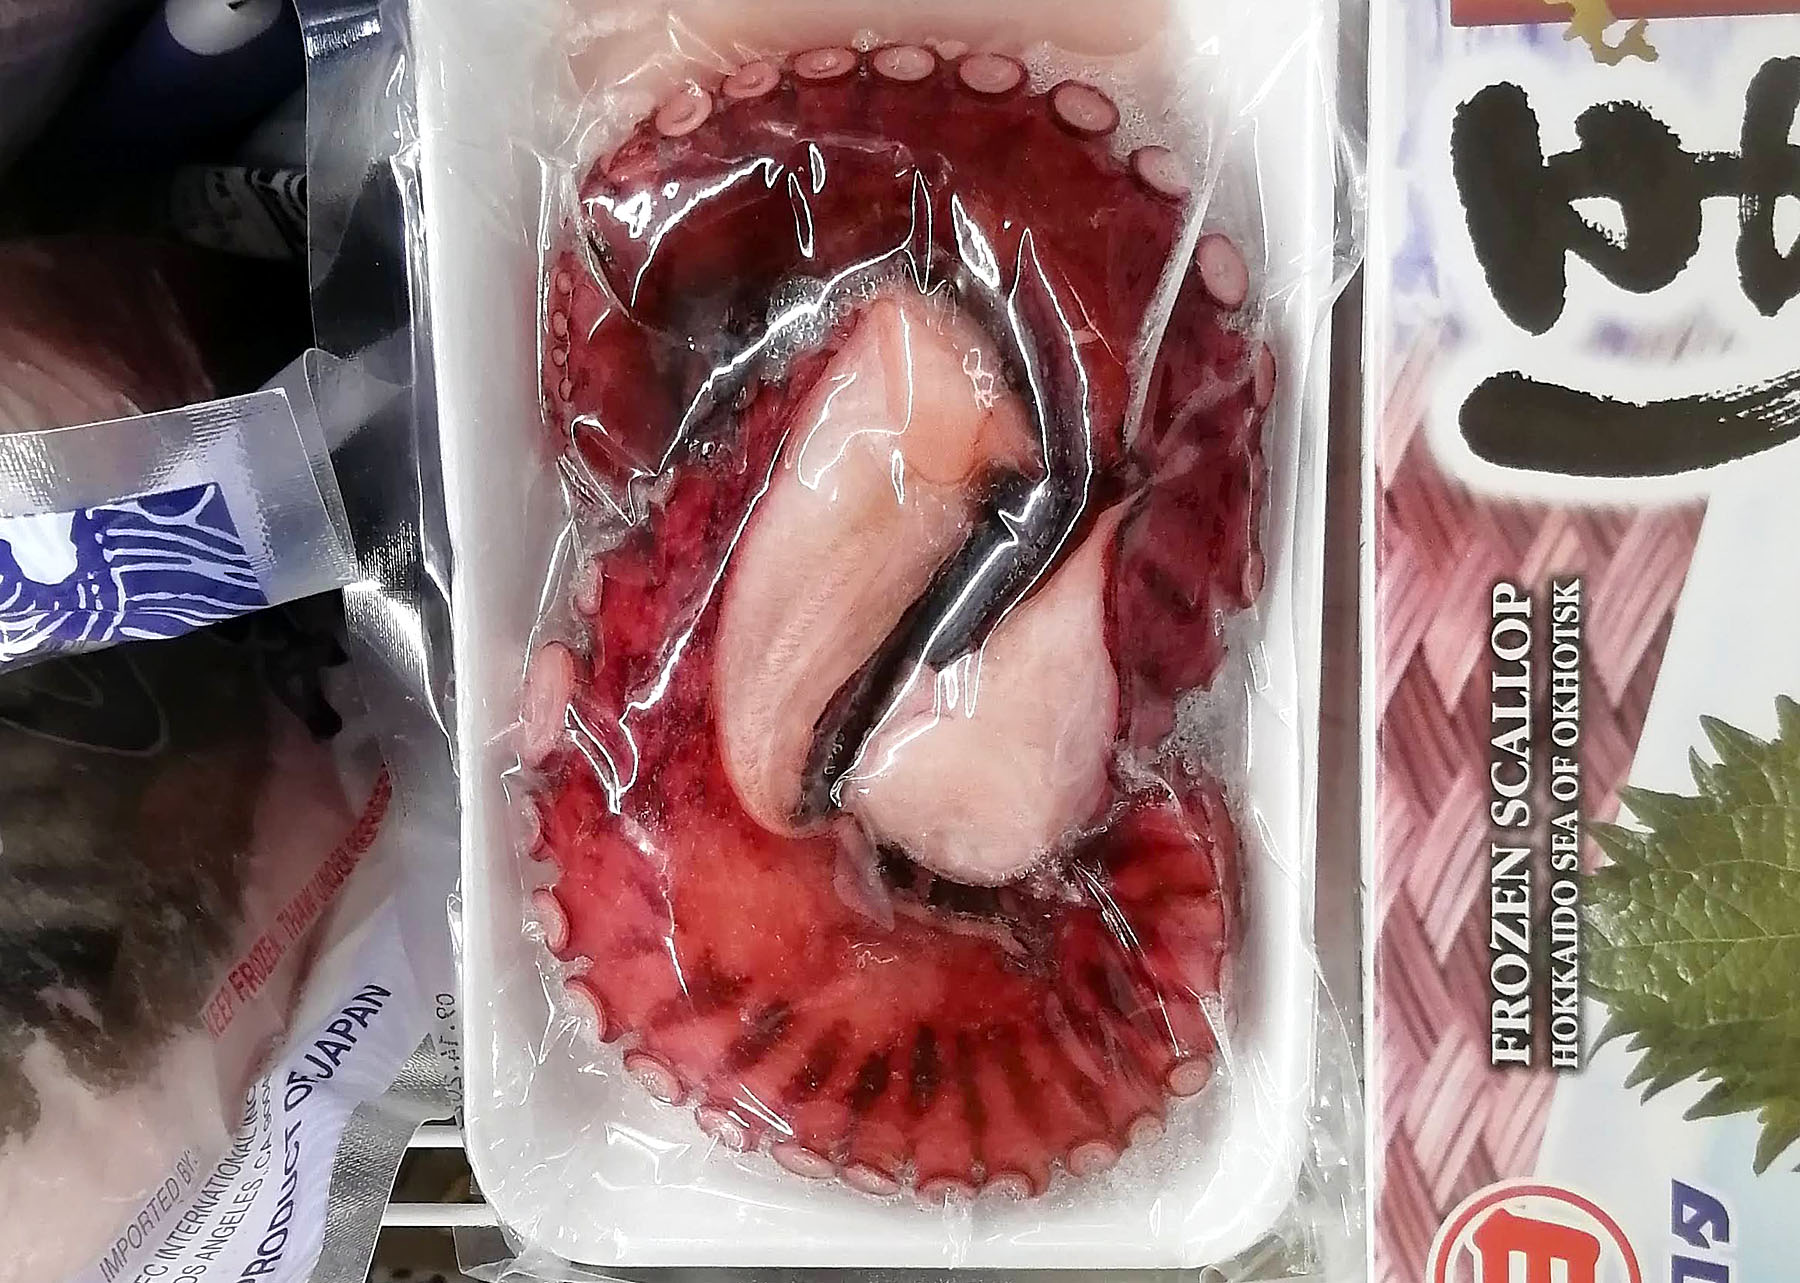 A package of frozen octopus legs in the freezer section of a grocery store nested between two other packages. Photo by Paul Young.